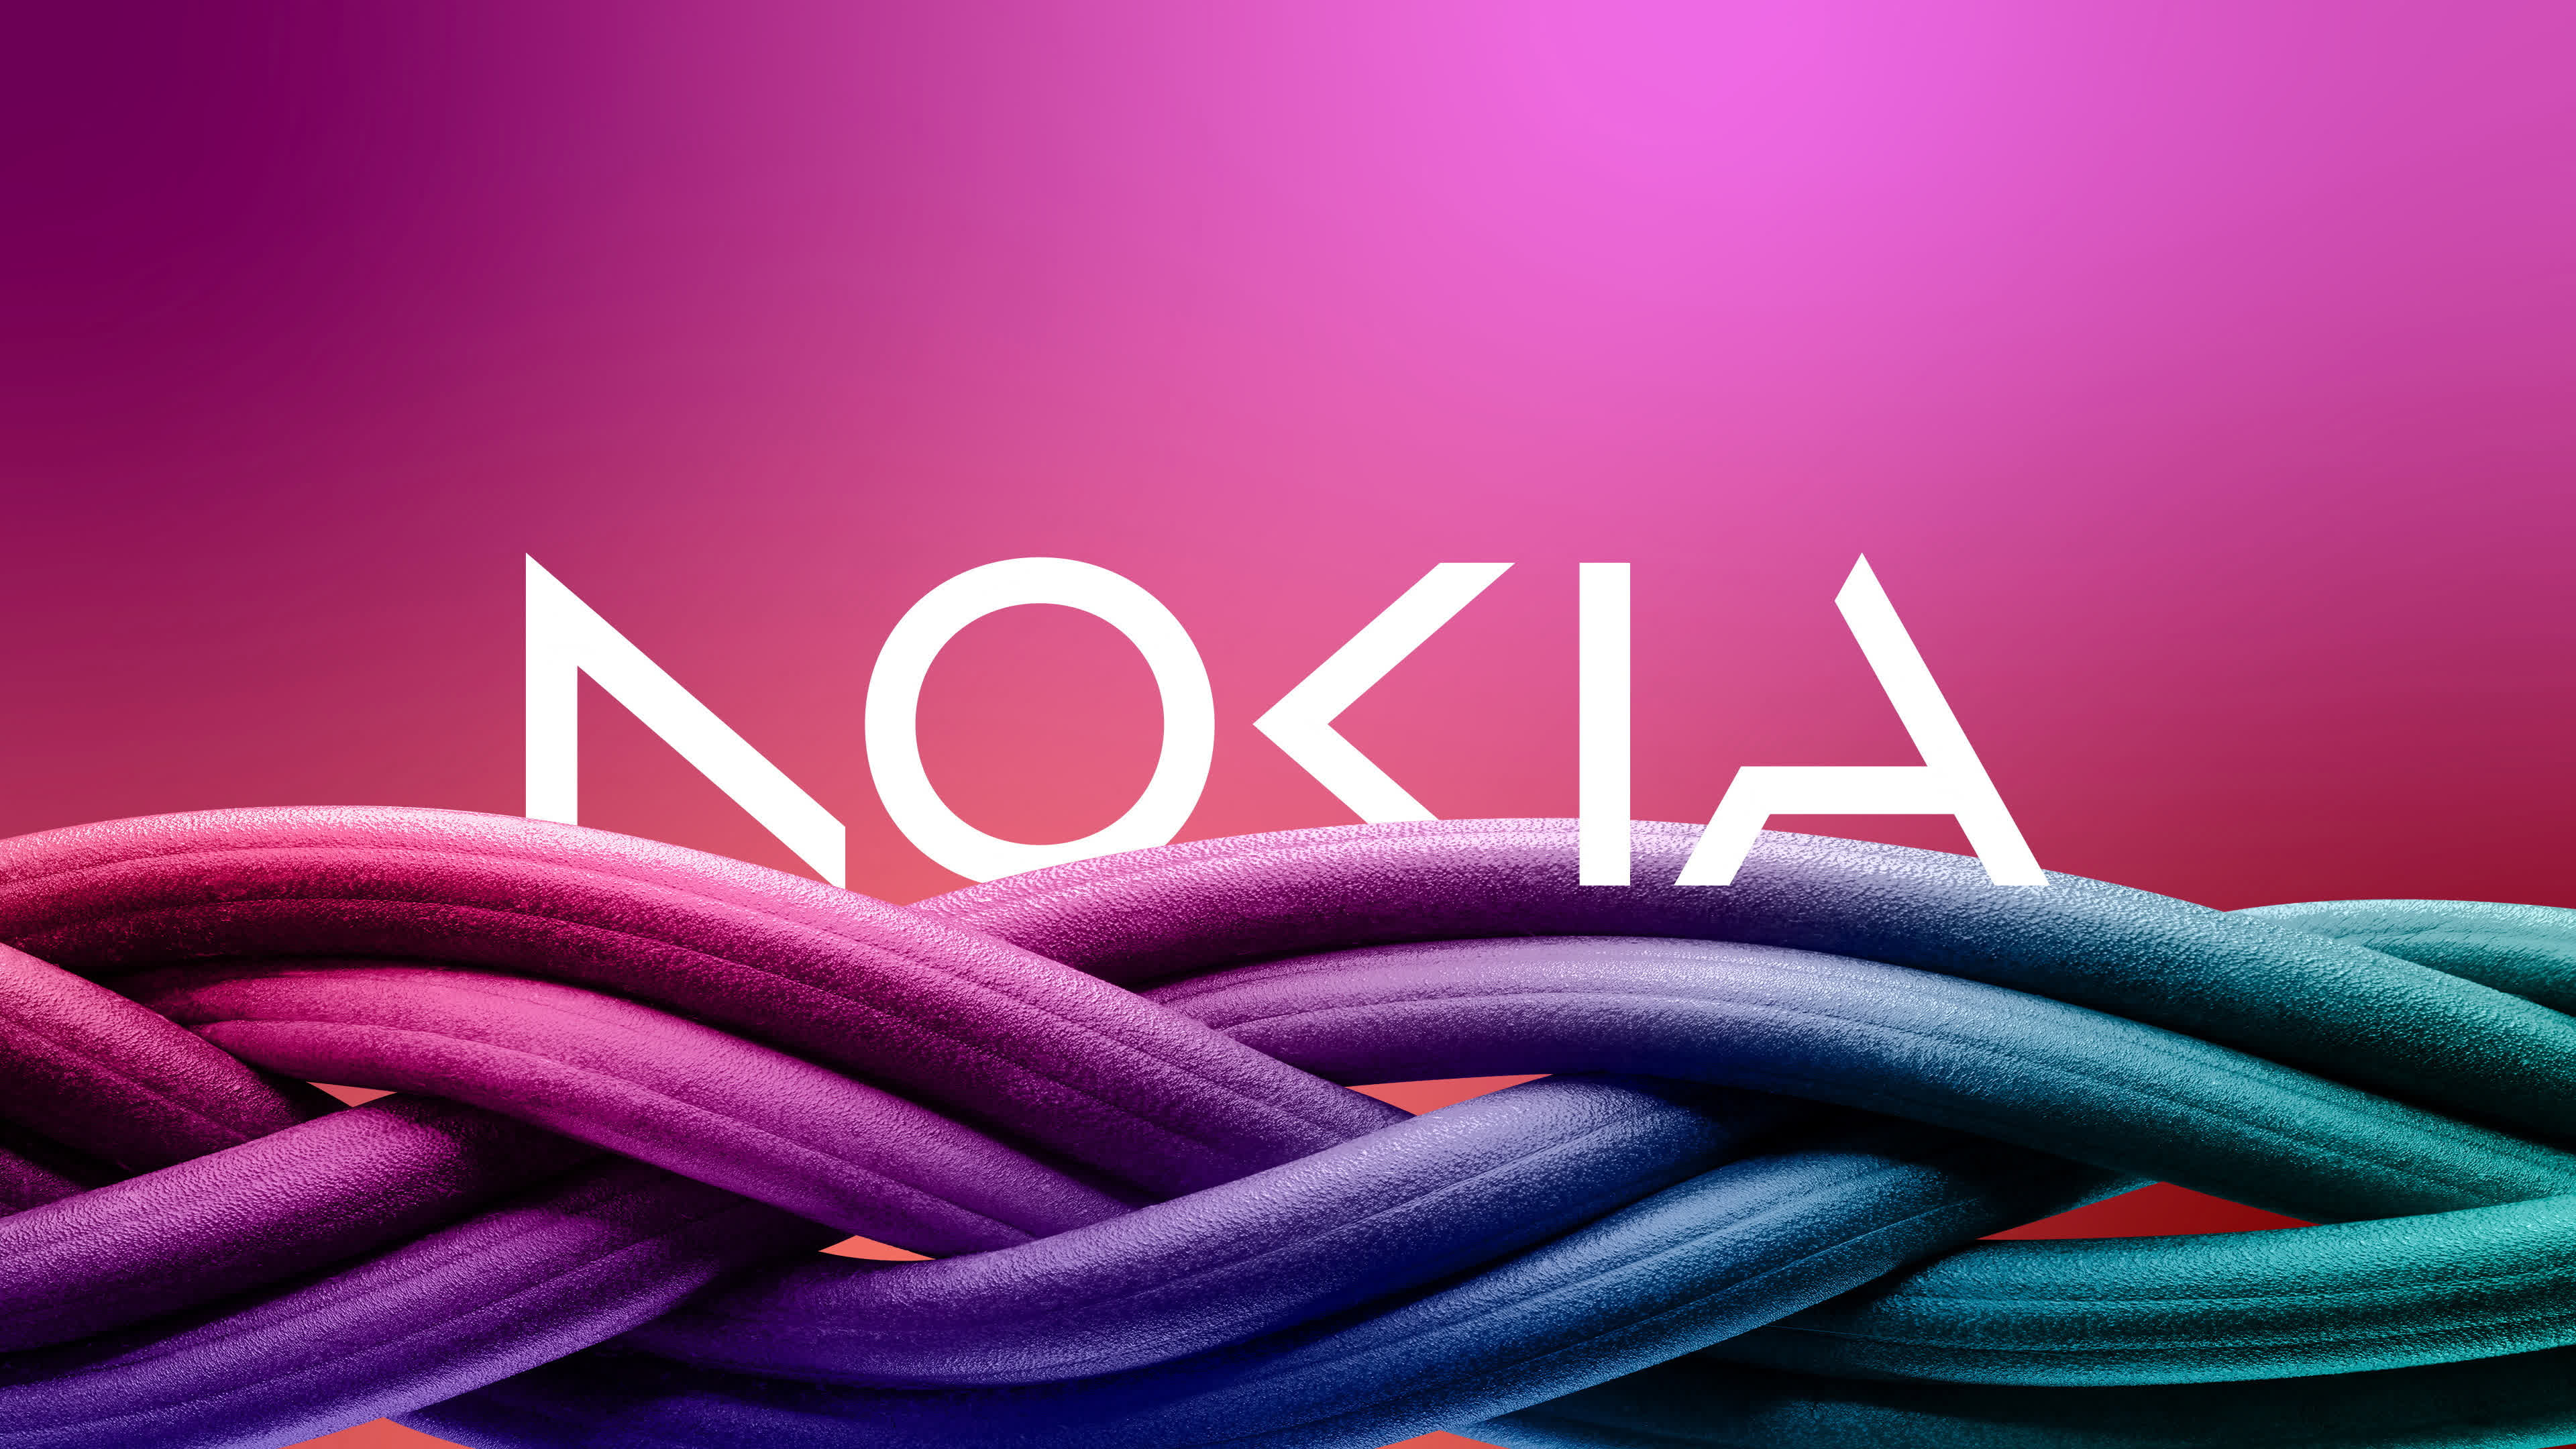 Nokia changes logo for first time in almost 60 years to distance itself from smartphones